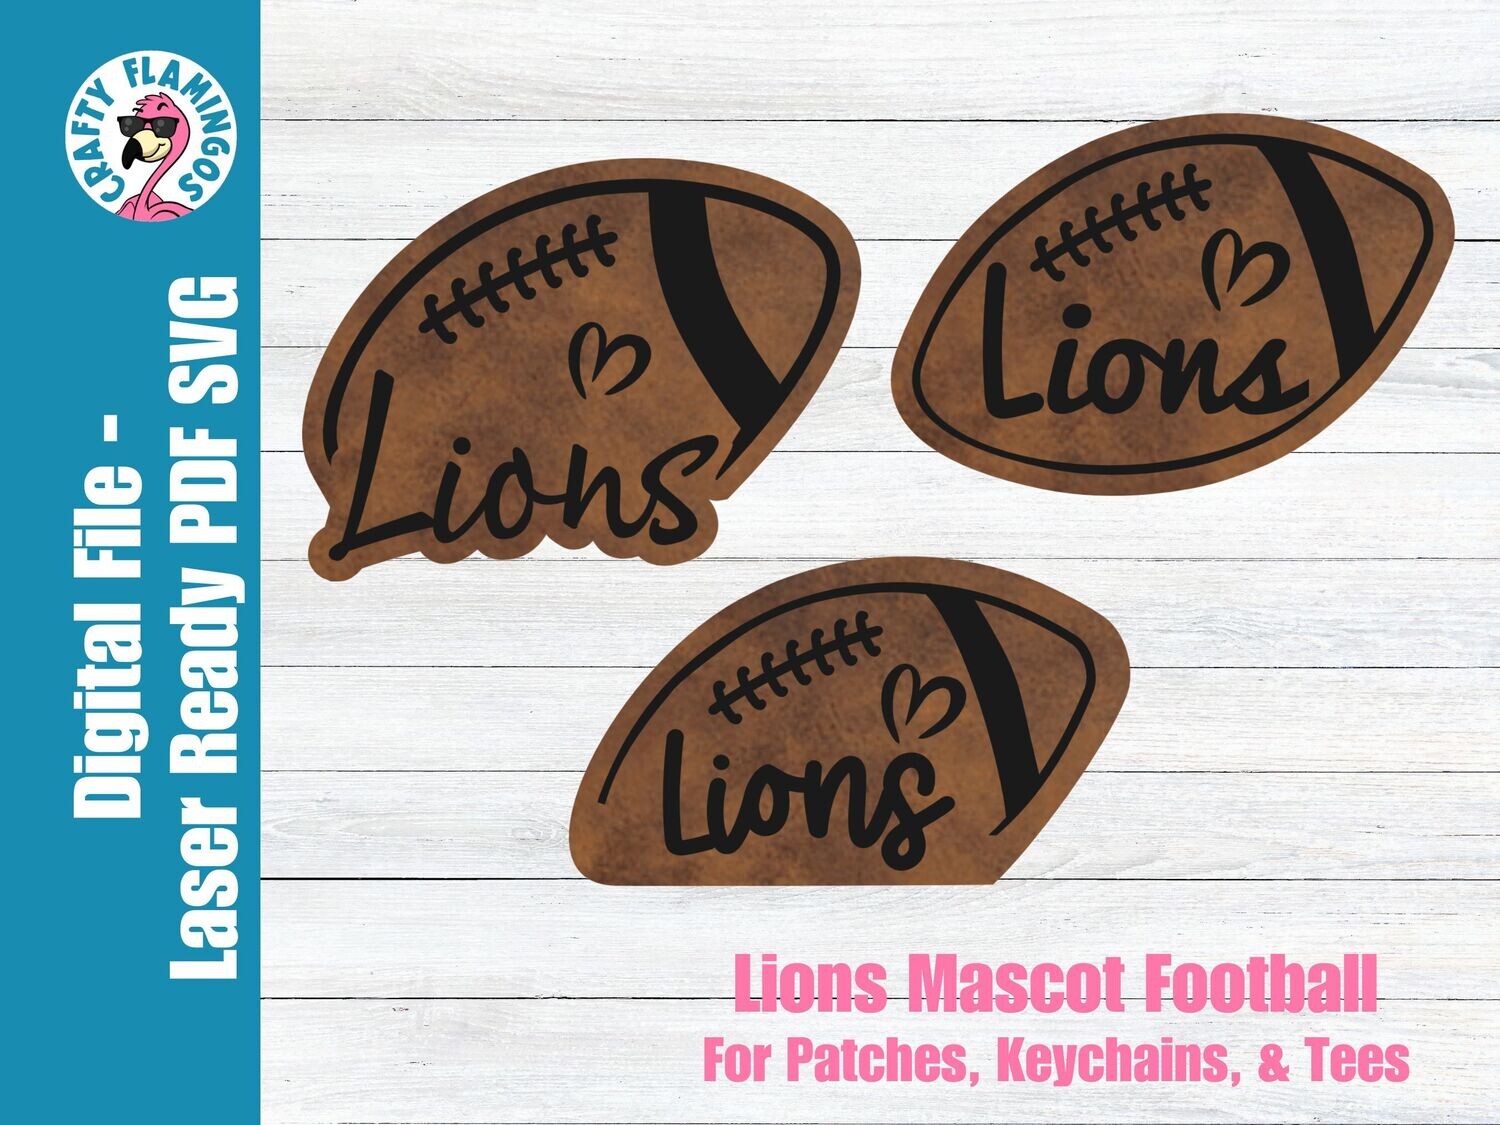 Lions Mascot Football - 3 styles - Patches, Keychain, & Tees - SVG Laser Glowforge Cut File Digital Download PDF